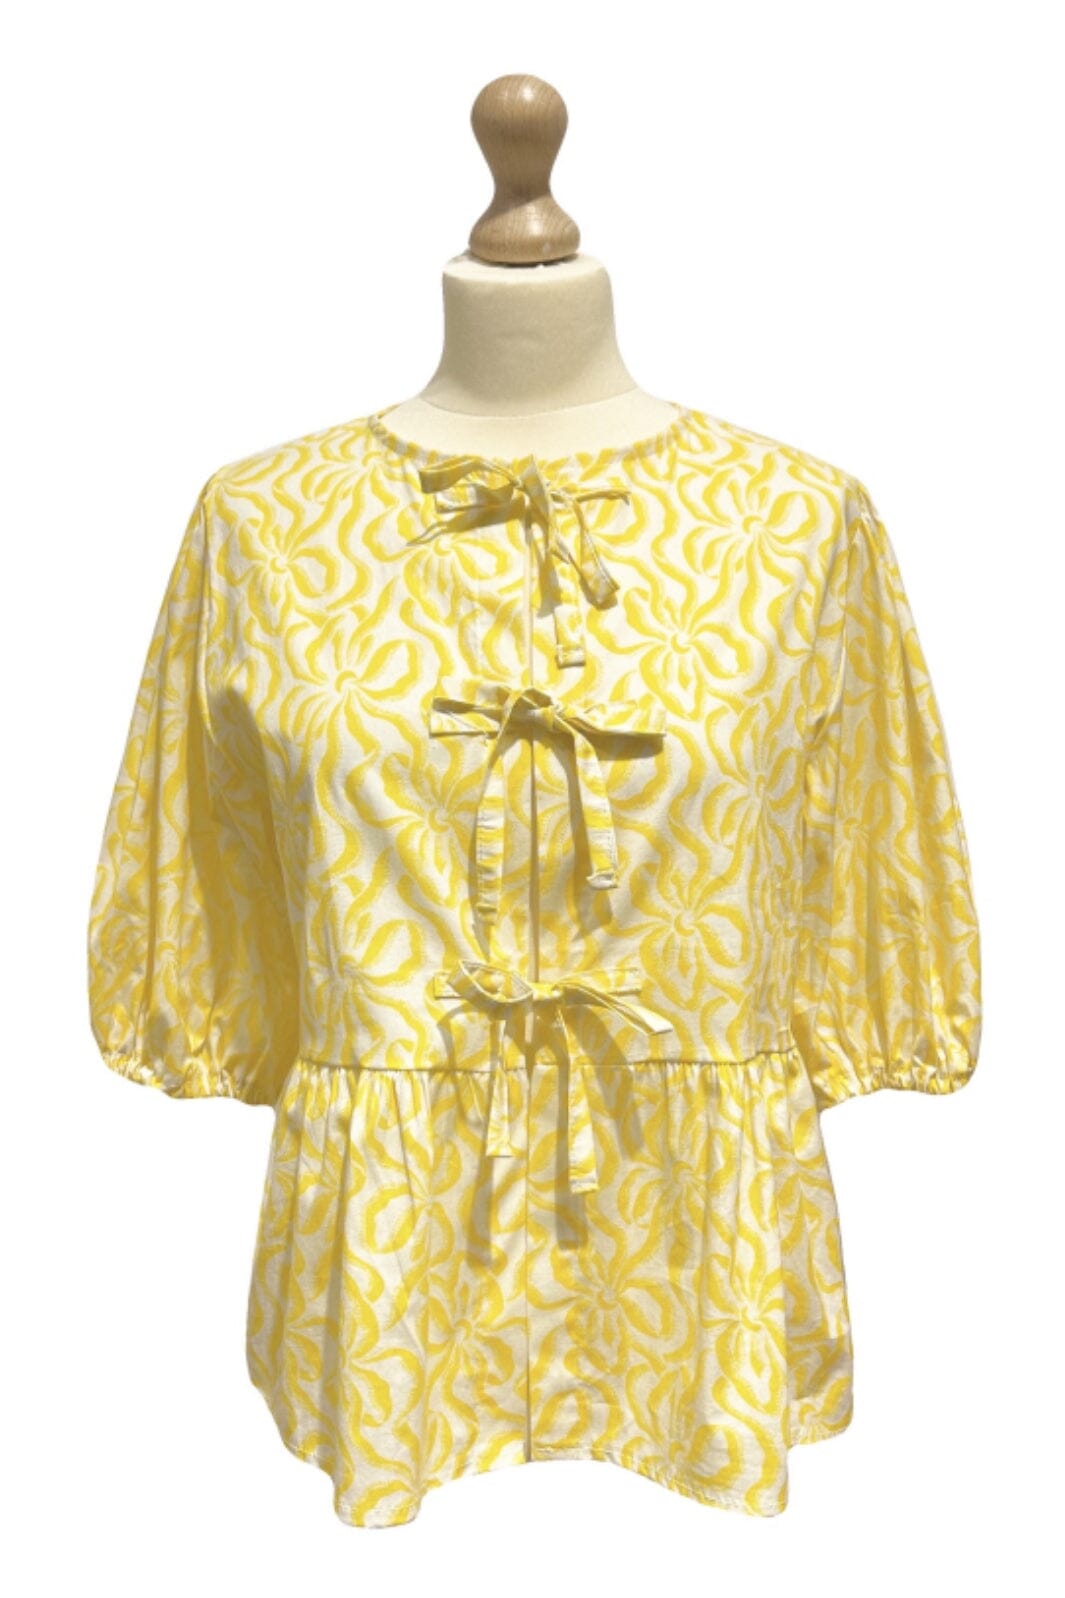 A-bee - Top Flower Bows 12275F - Yellow T-shirts 